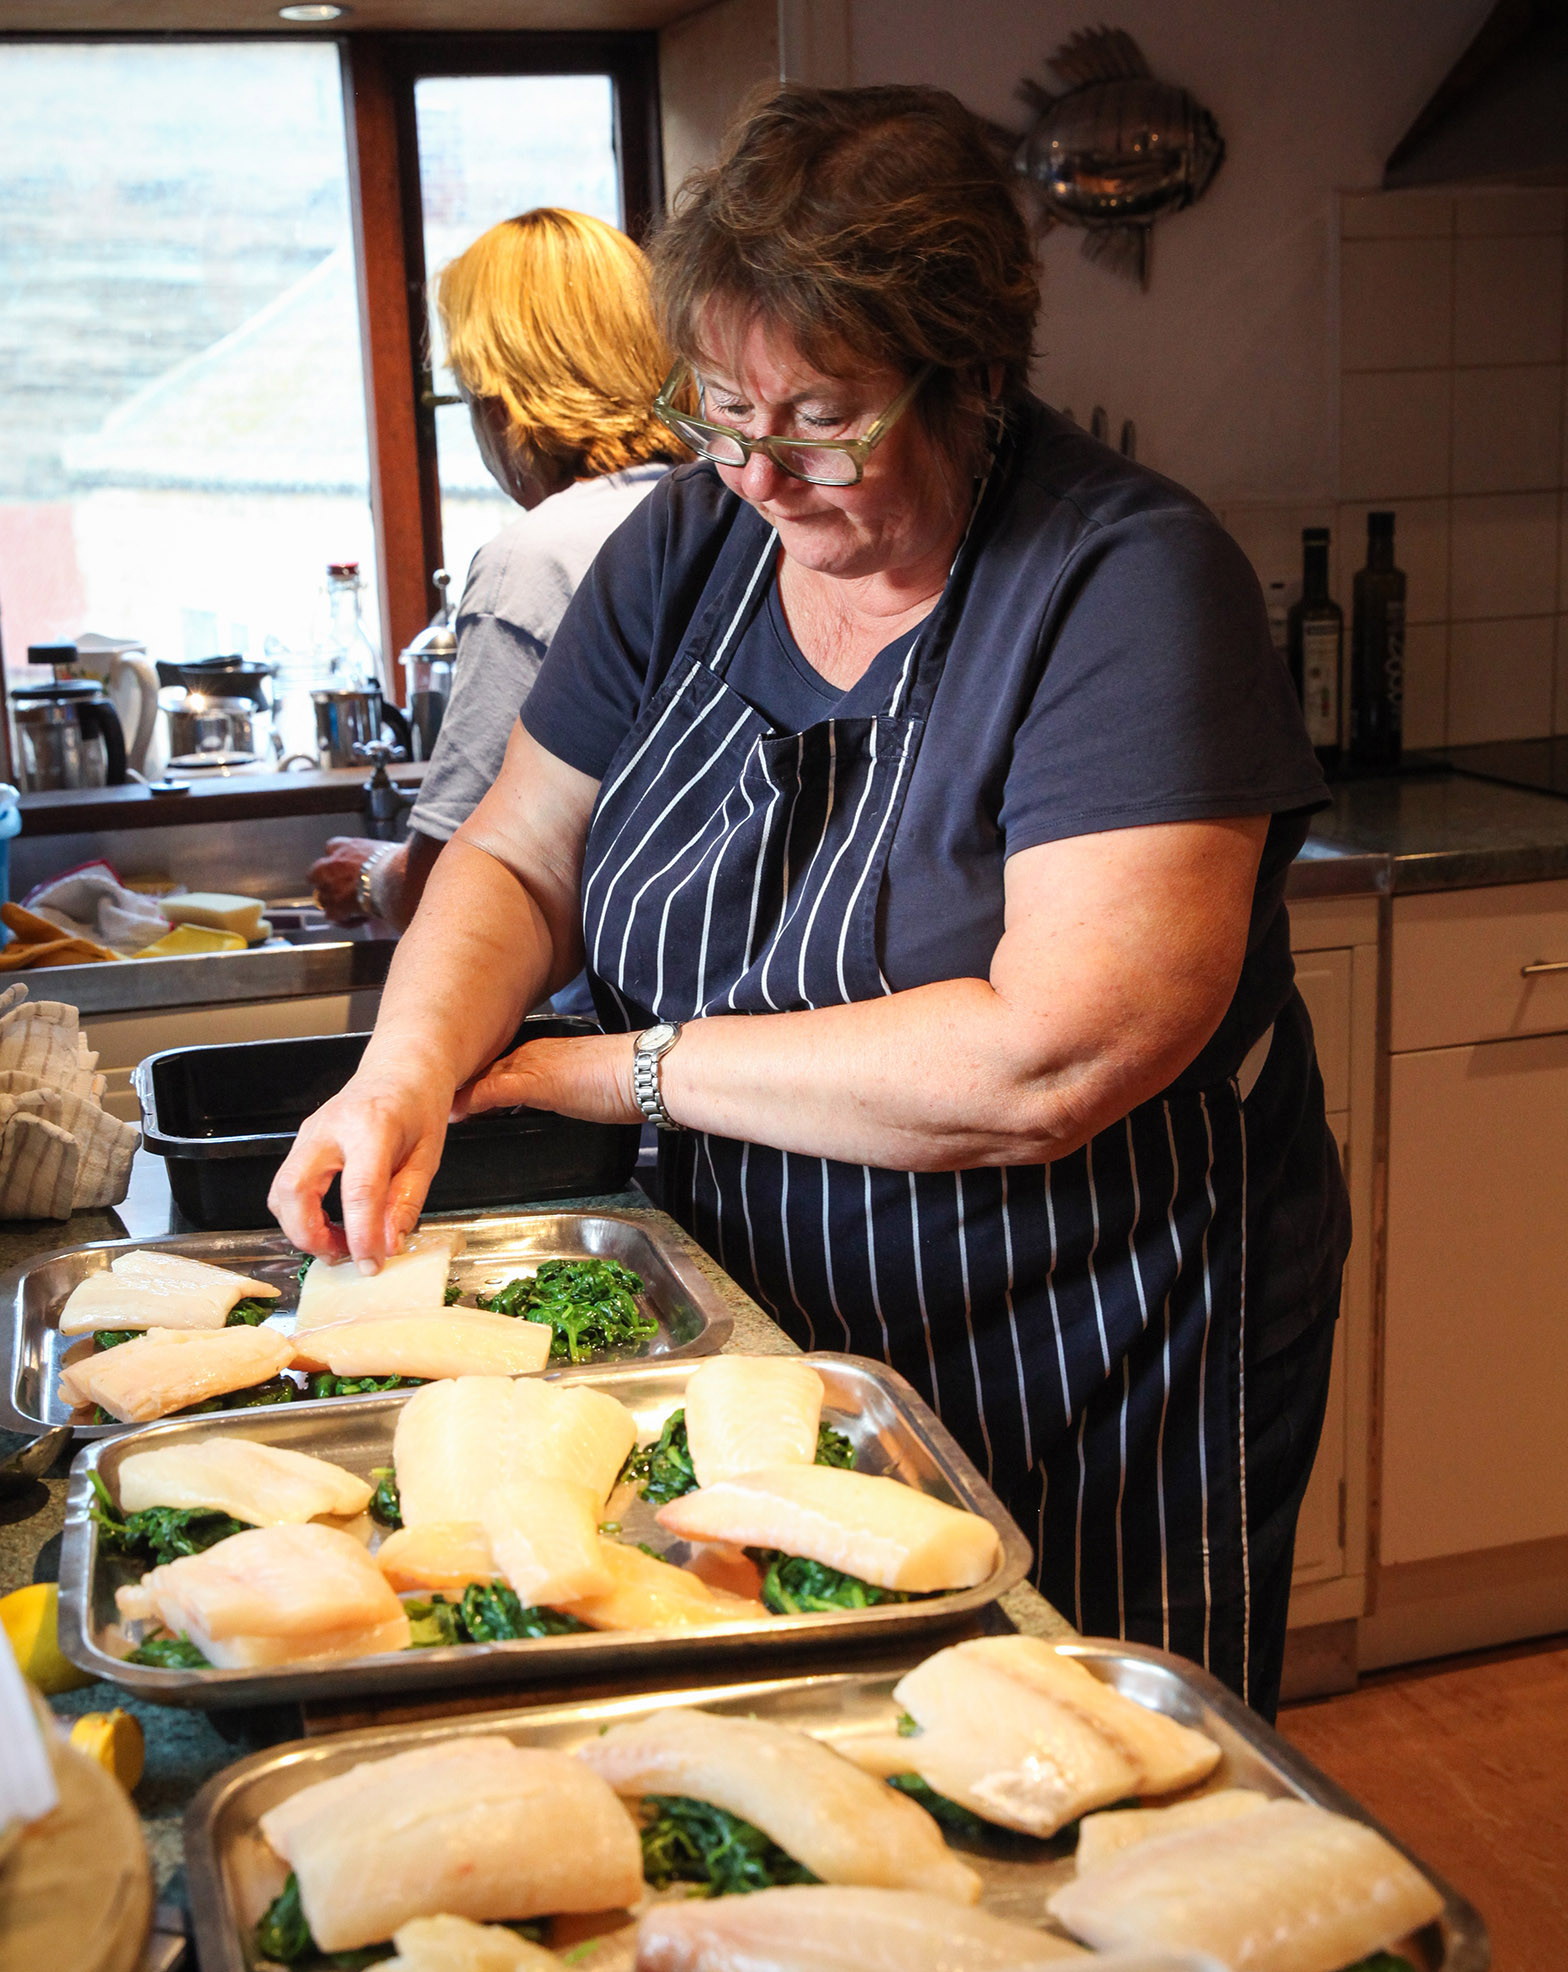 Lisa preparing fish in the kitchen by Ceri Oakes